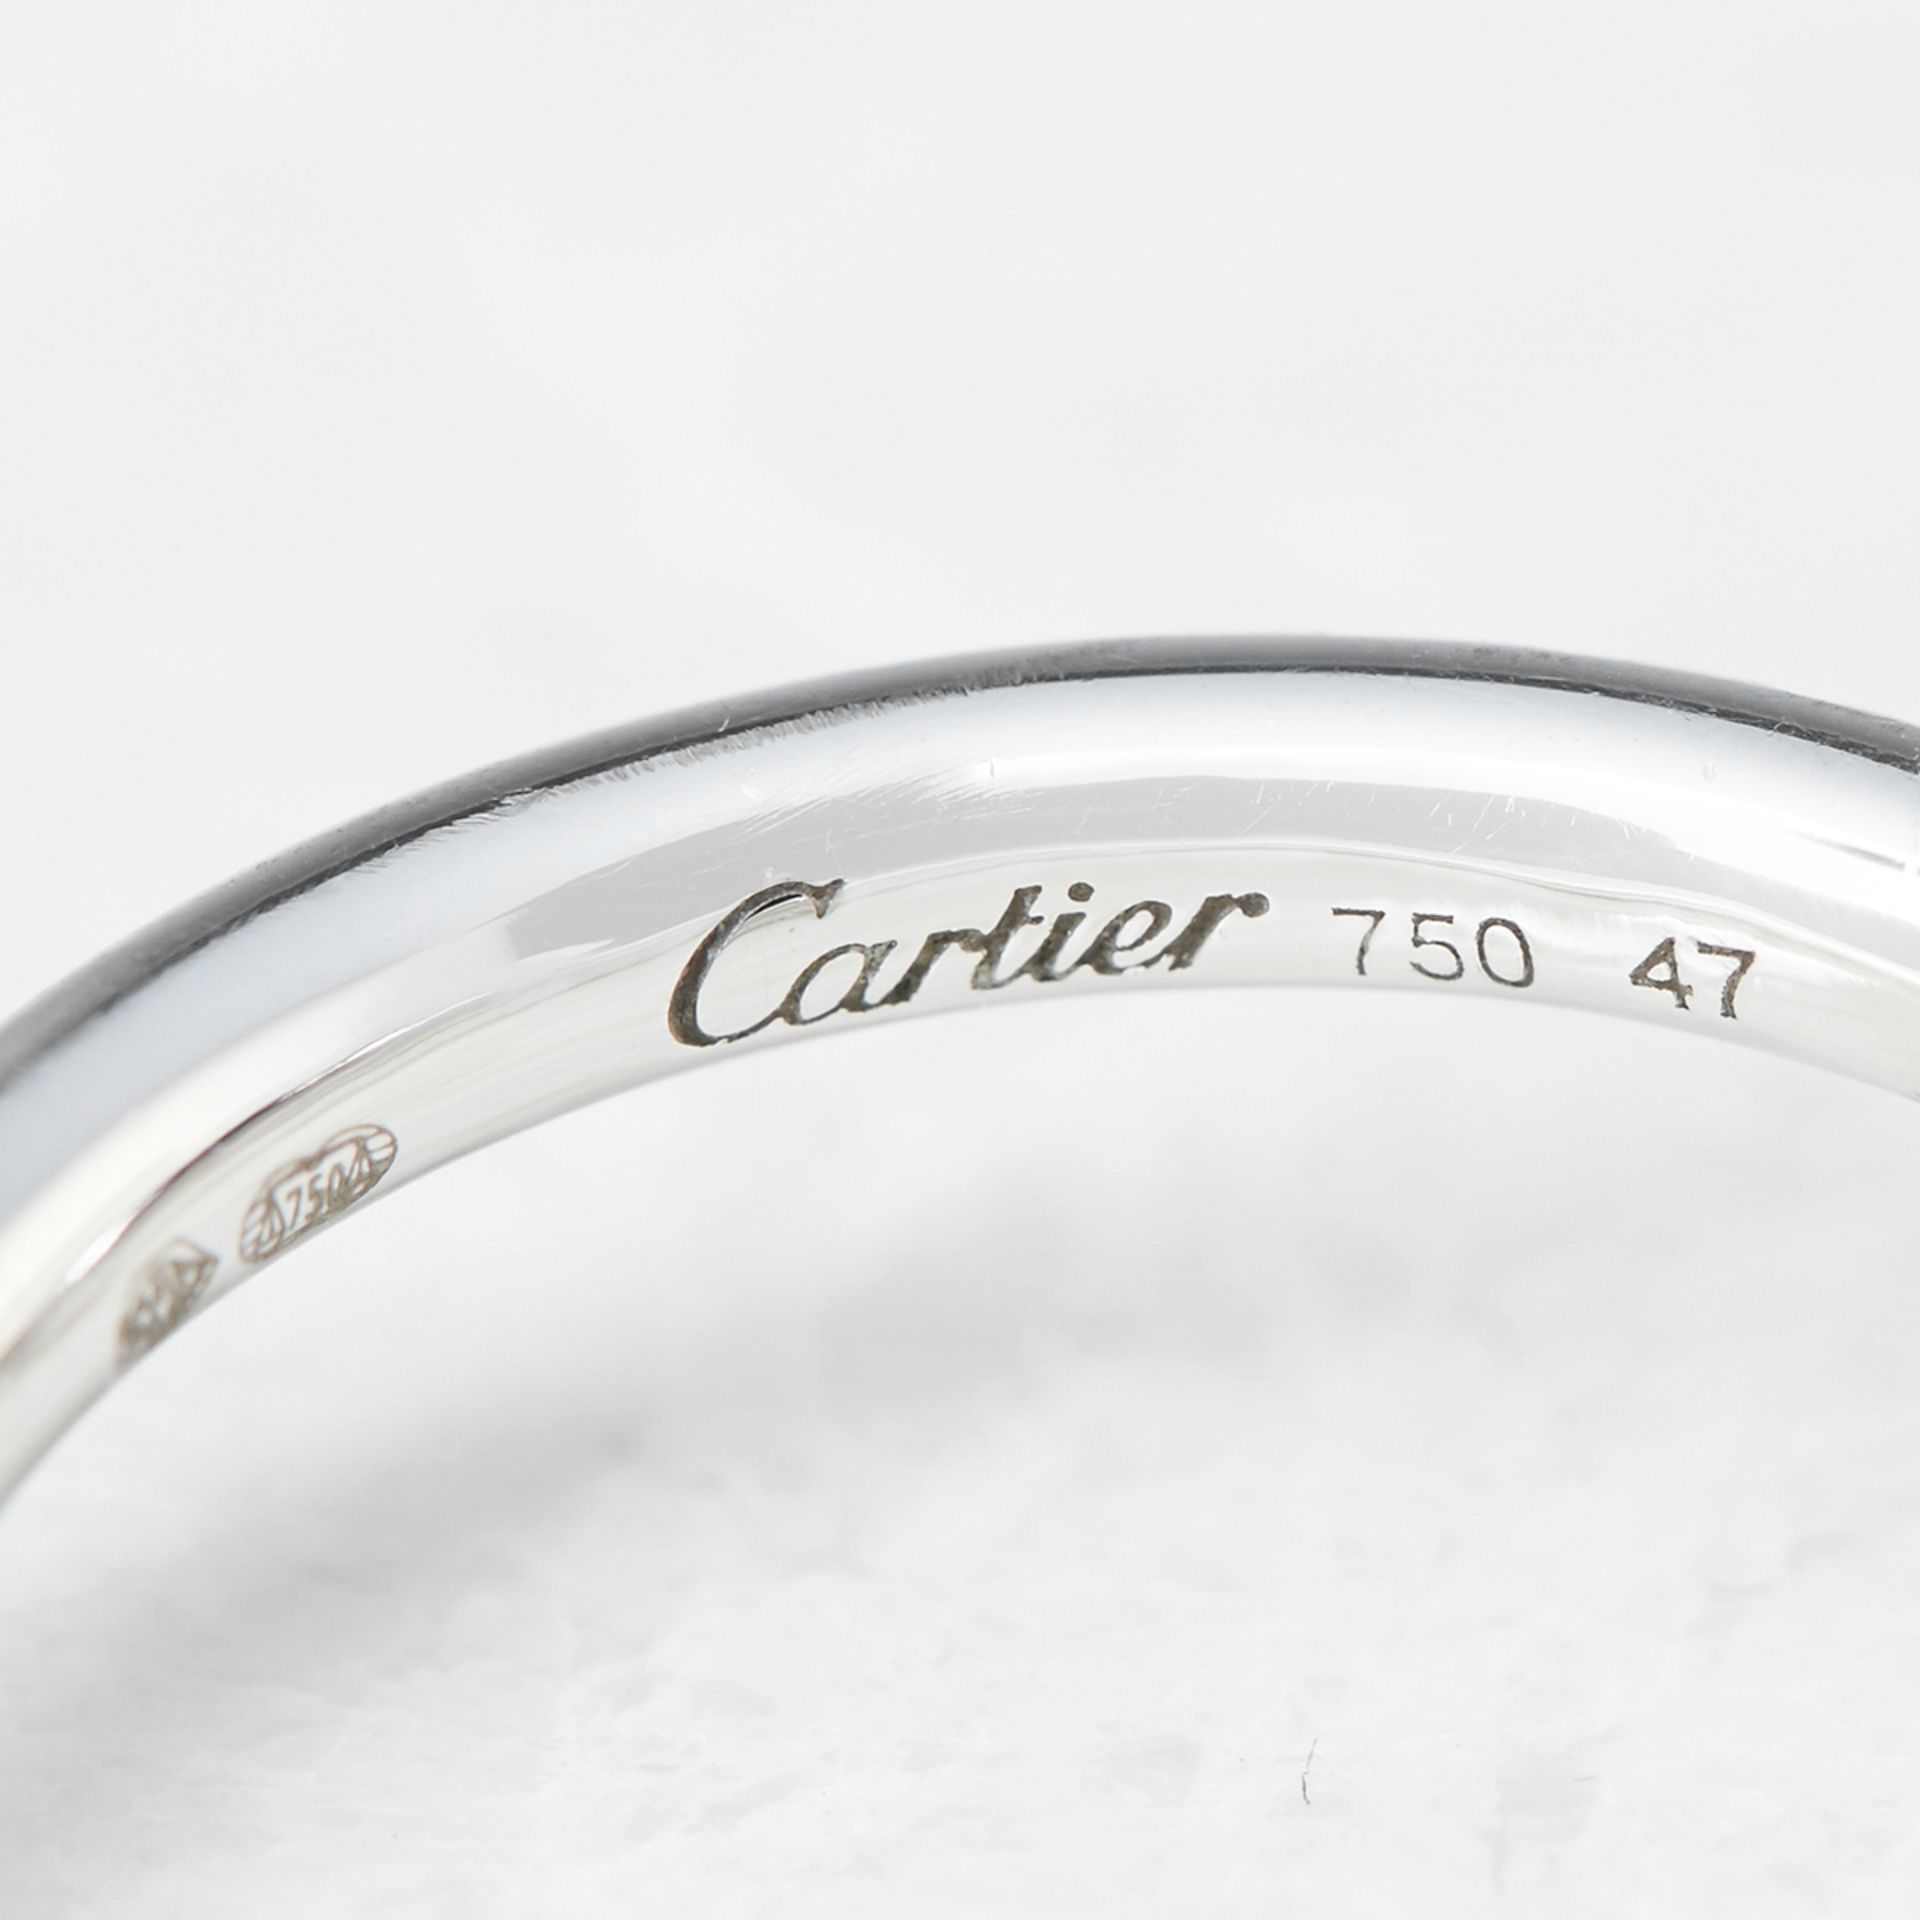 Cartier 18k White Gold 0.32ct Diamond Entrelac's Ring - Image 6 of 9